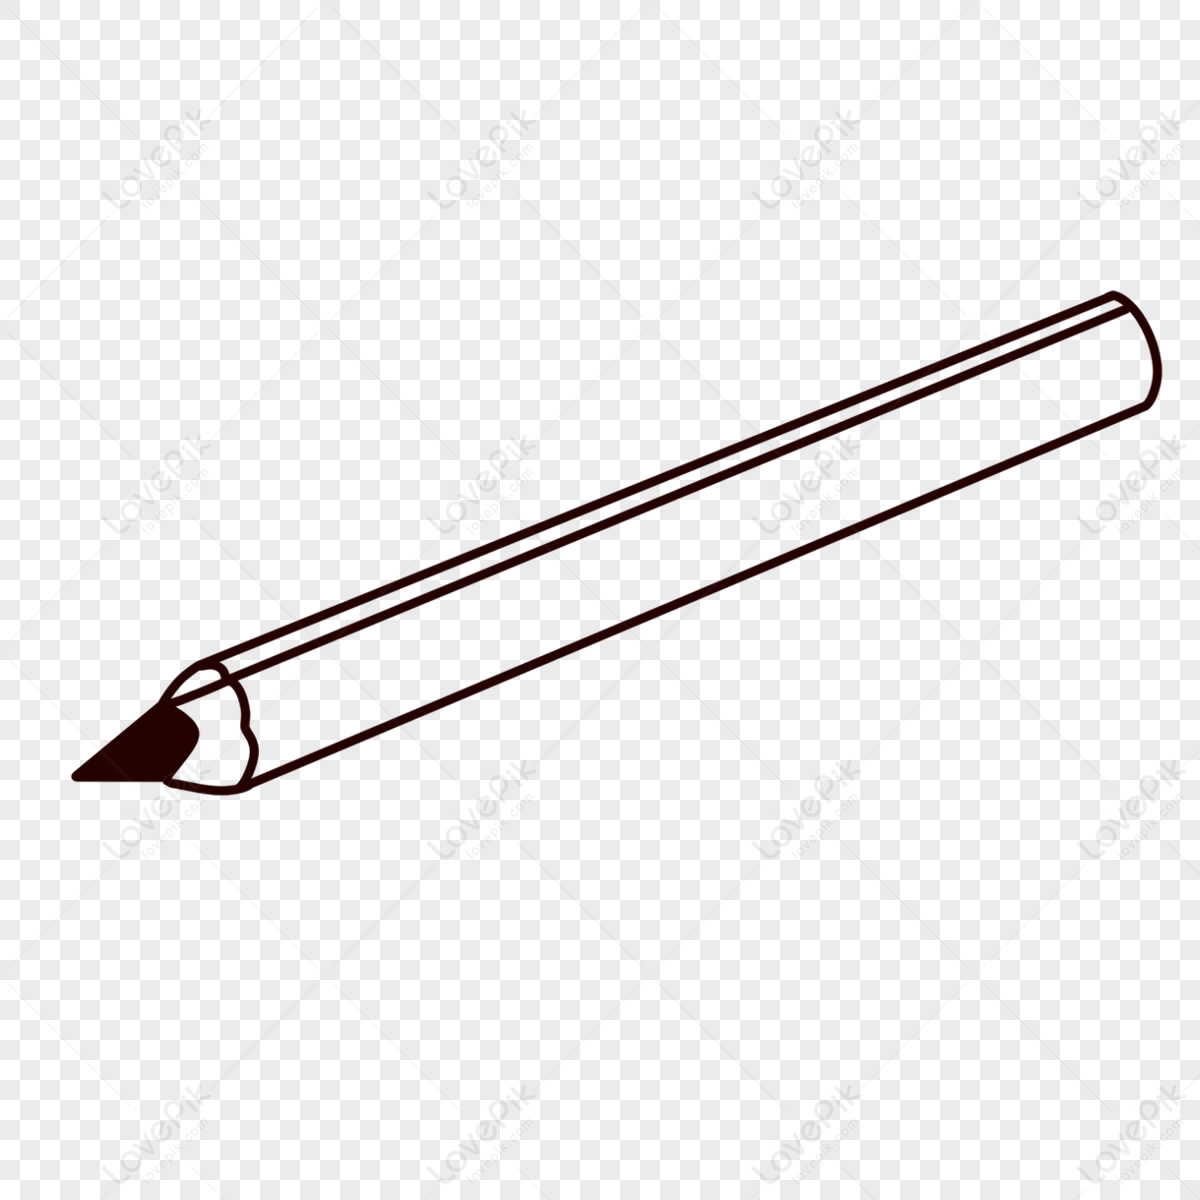 Pencil Hand Drawn Outline Doodle Icon Stock Illustration - Download Image  Now - Art, Concepts, Creative Occupation - iStock